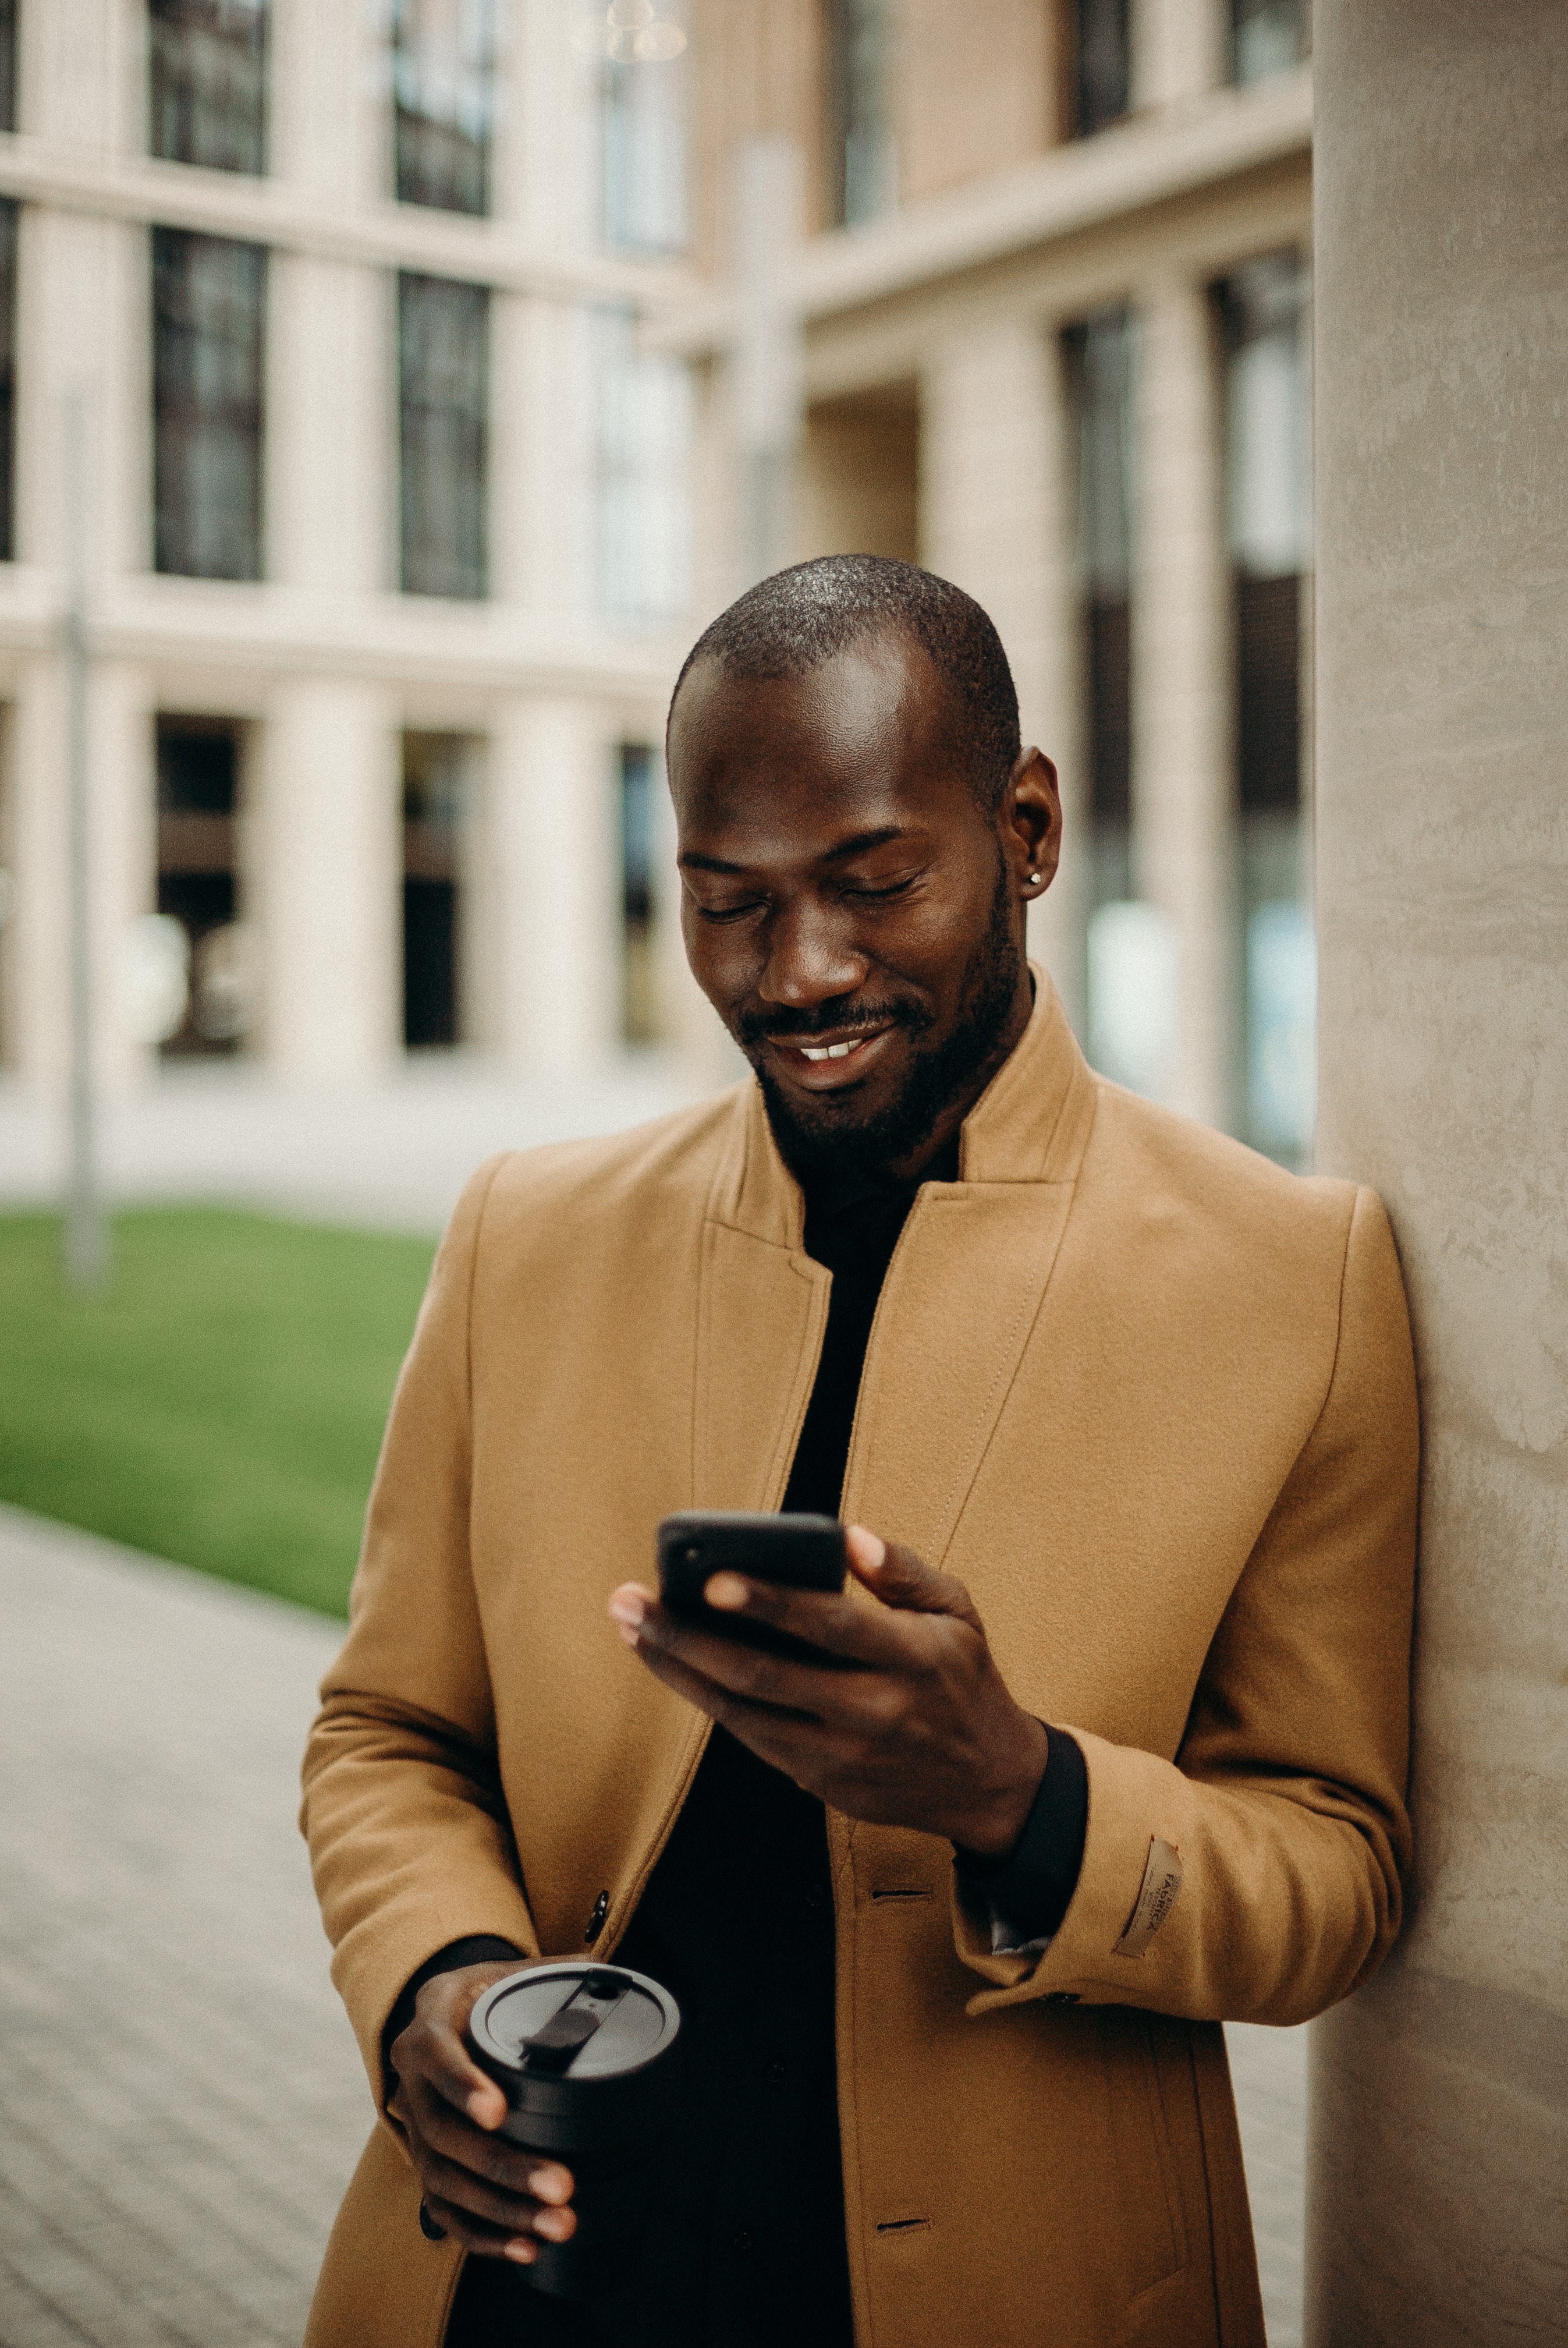 A man holding a coffee mug while looking at his phone. | Source: Pexels